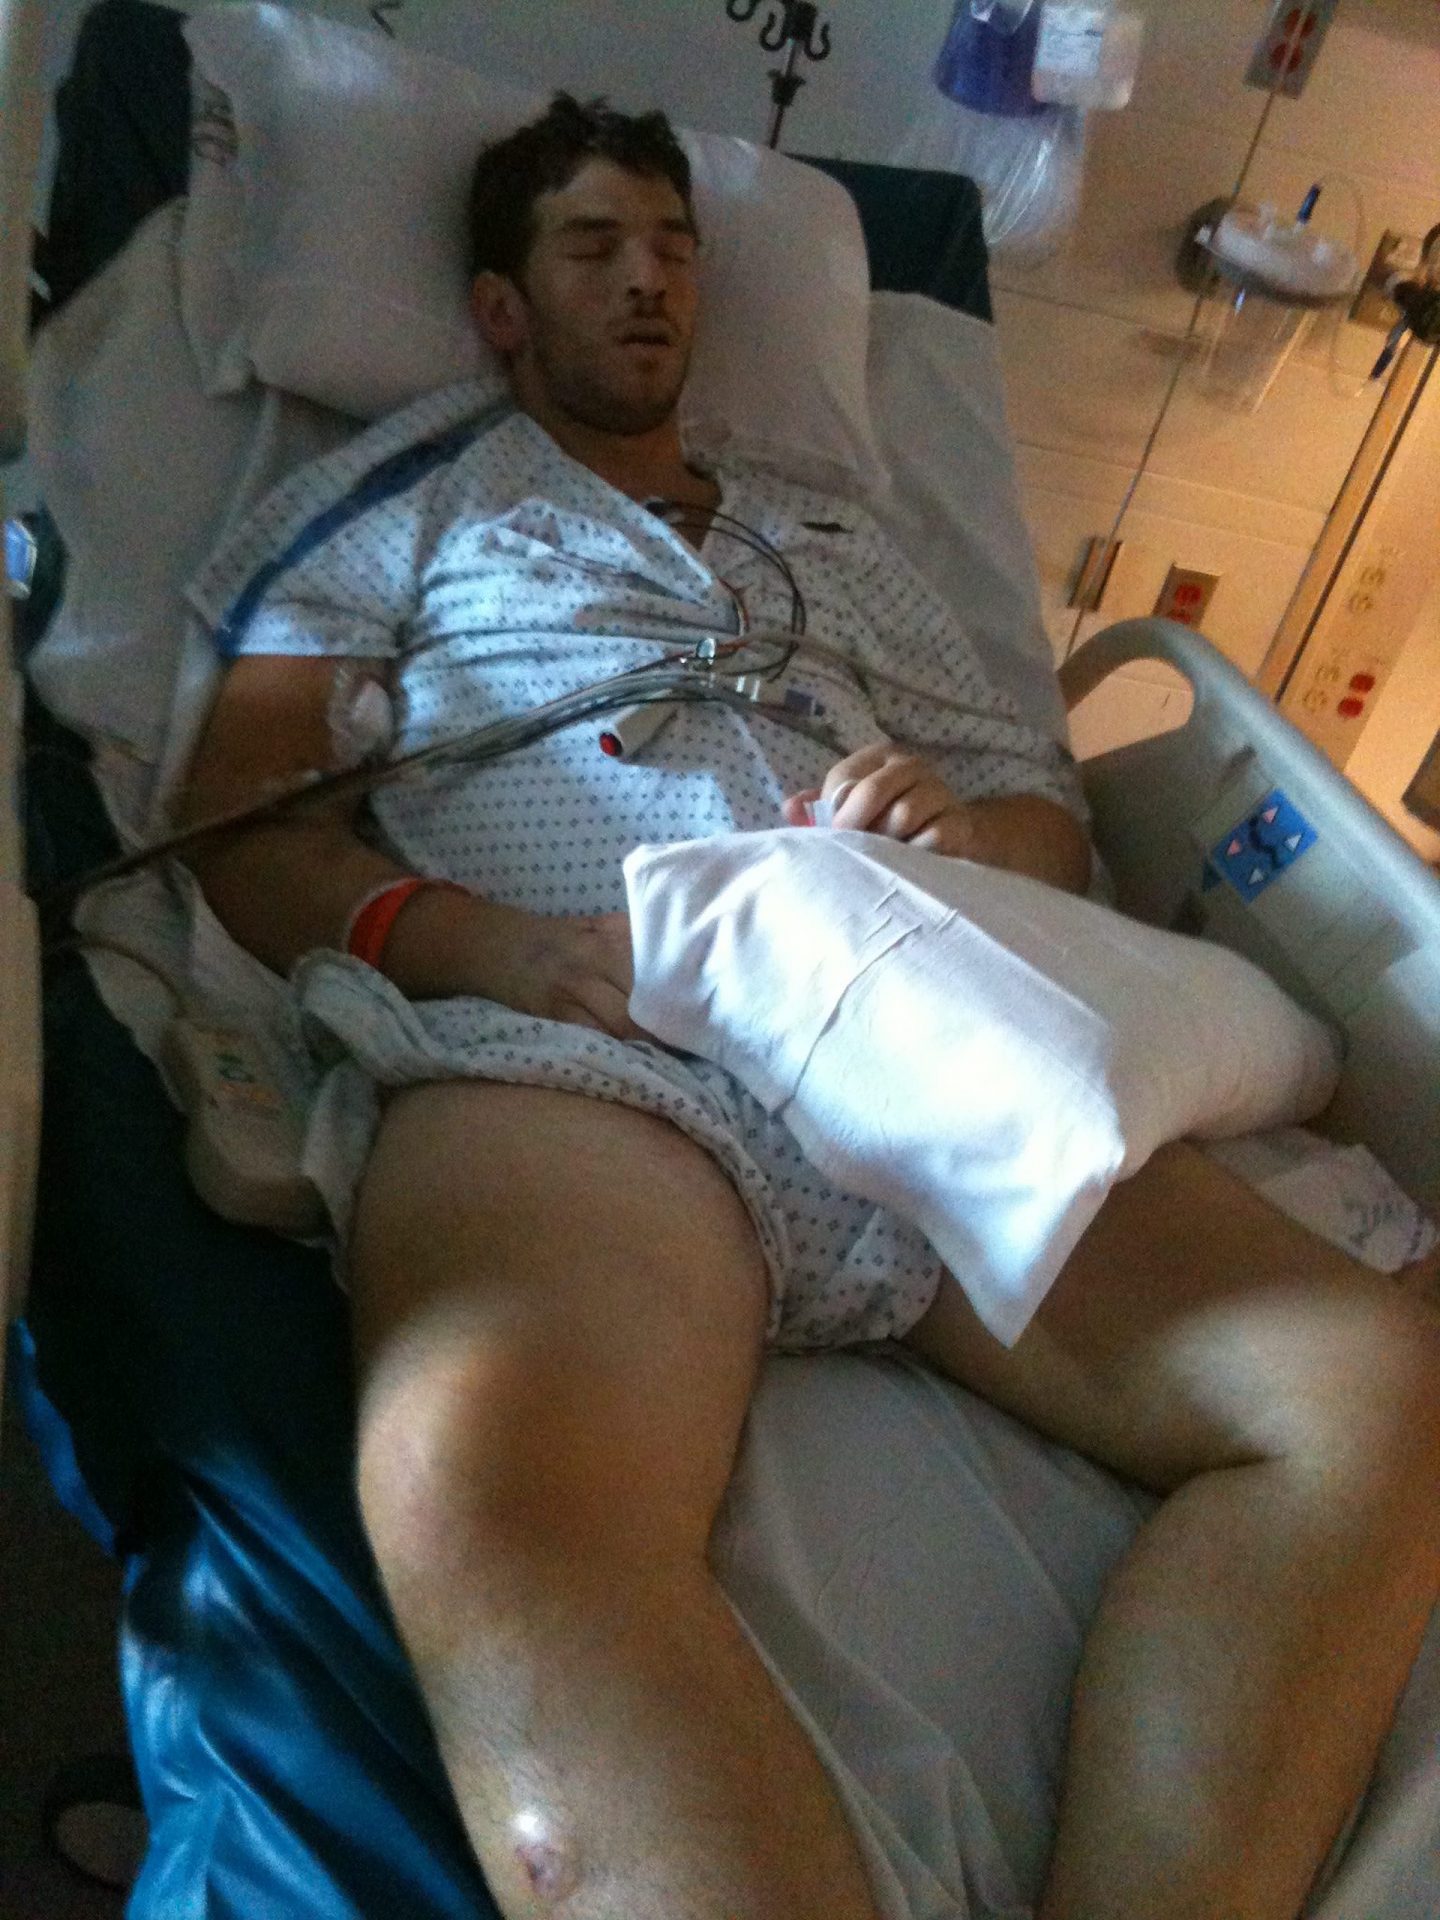 David Fajgenbaum was first hospitalized for Castleman's disease in 2010.